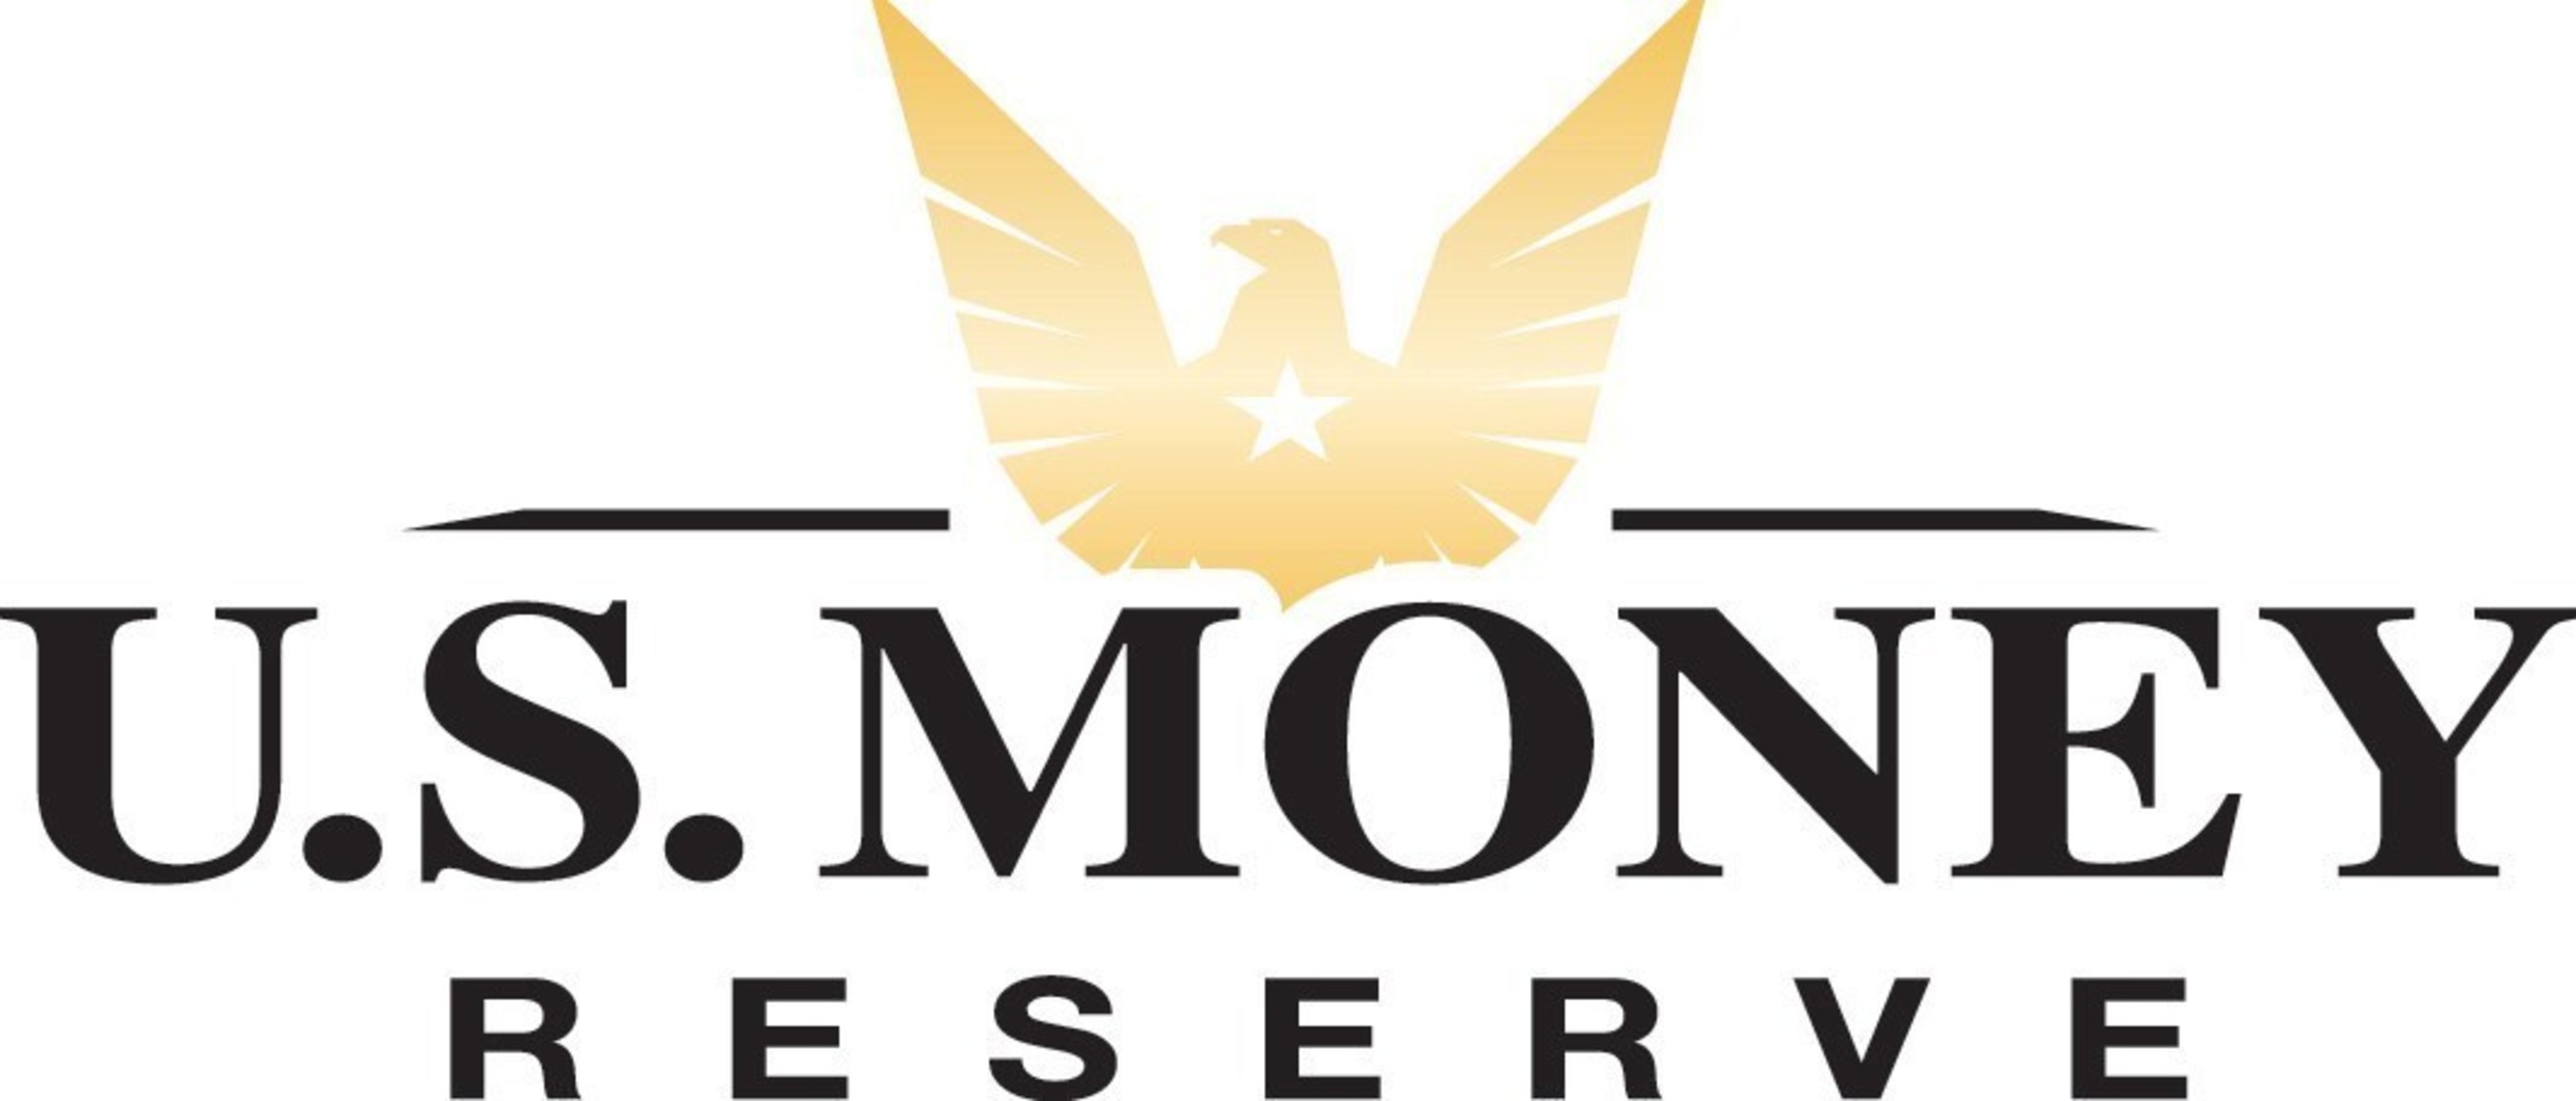 U.S. Money Reserve is one of the world's largest distributors of U.S. government-issued gold, silver and platinum products.